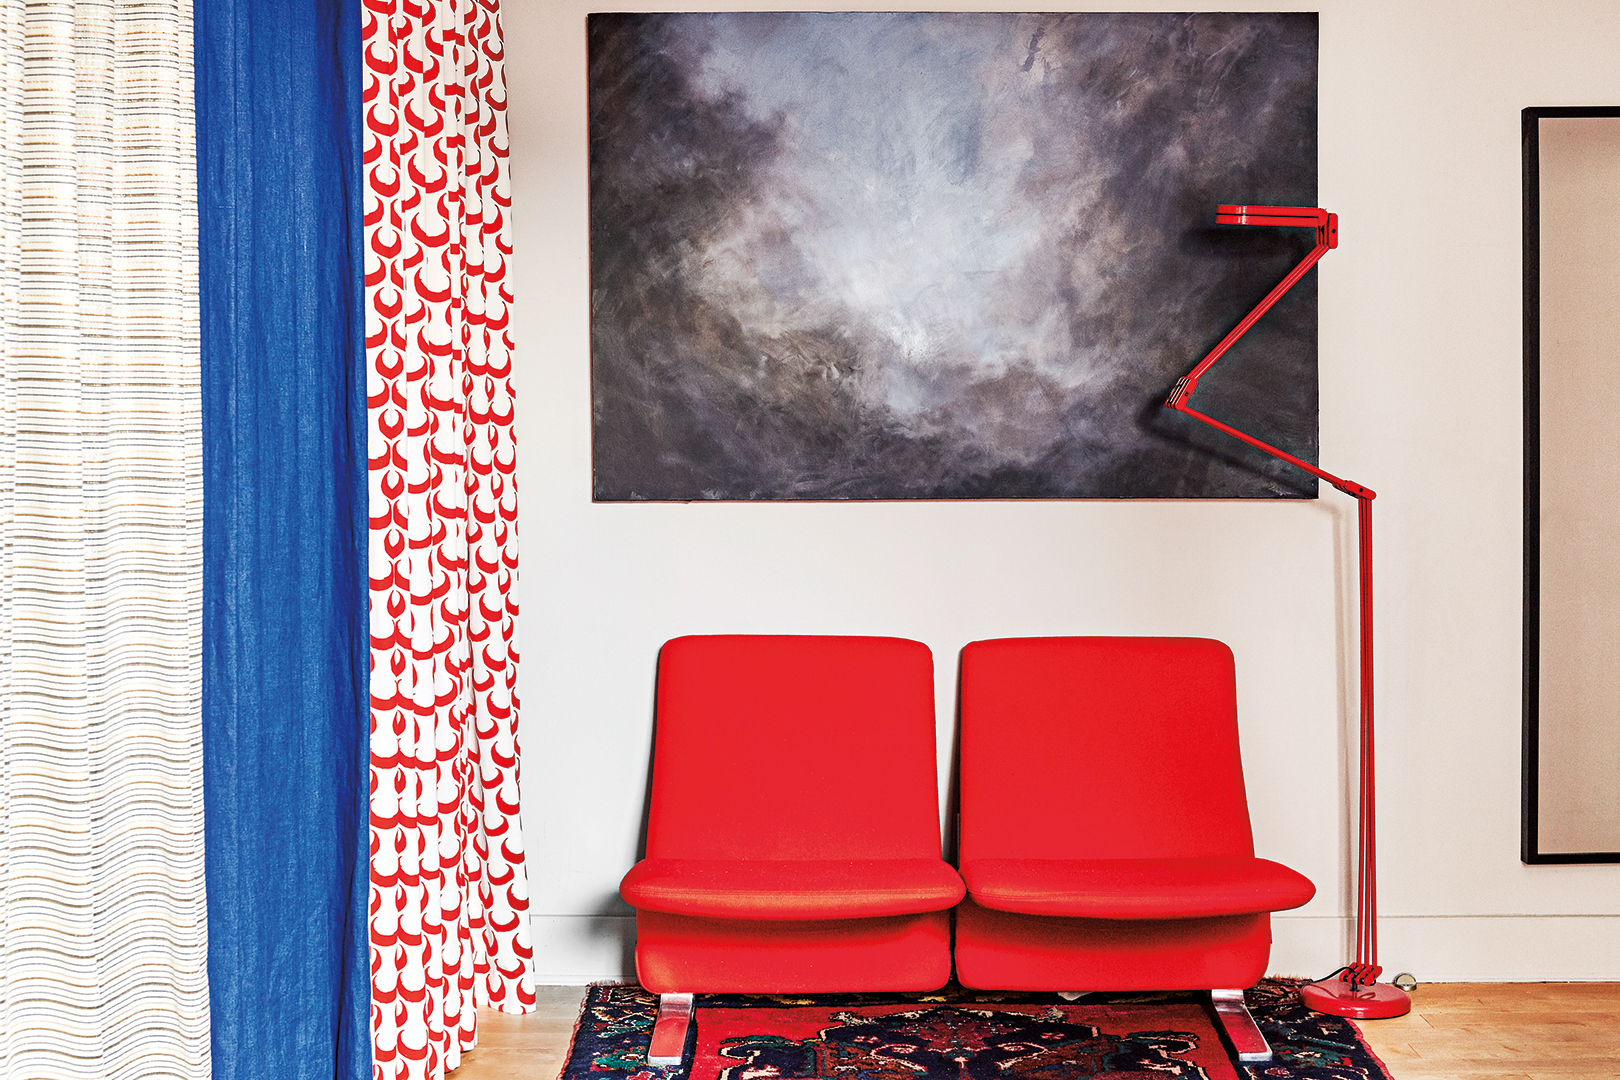 Room with red curtain and red chairs